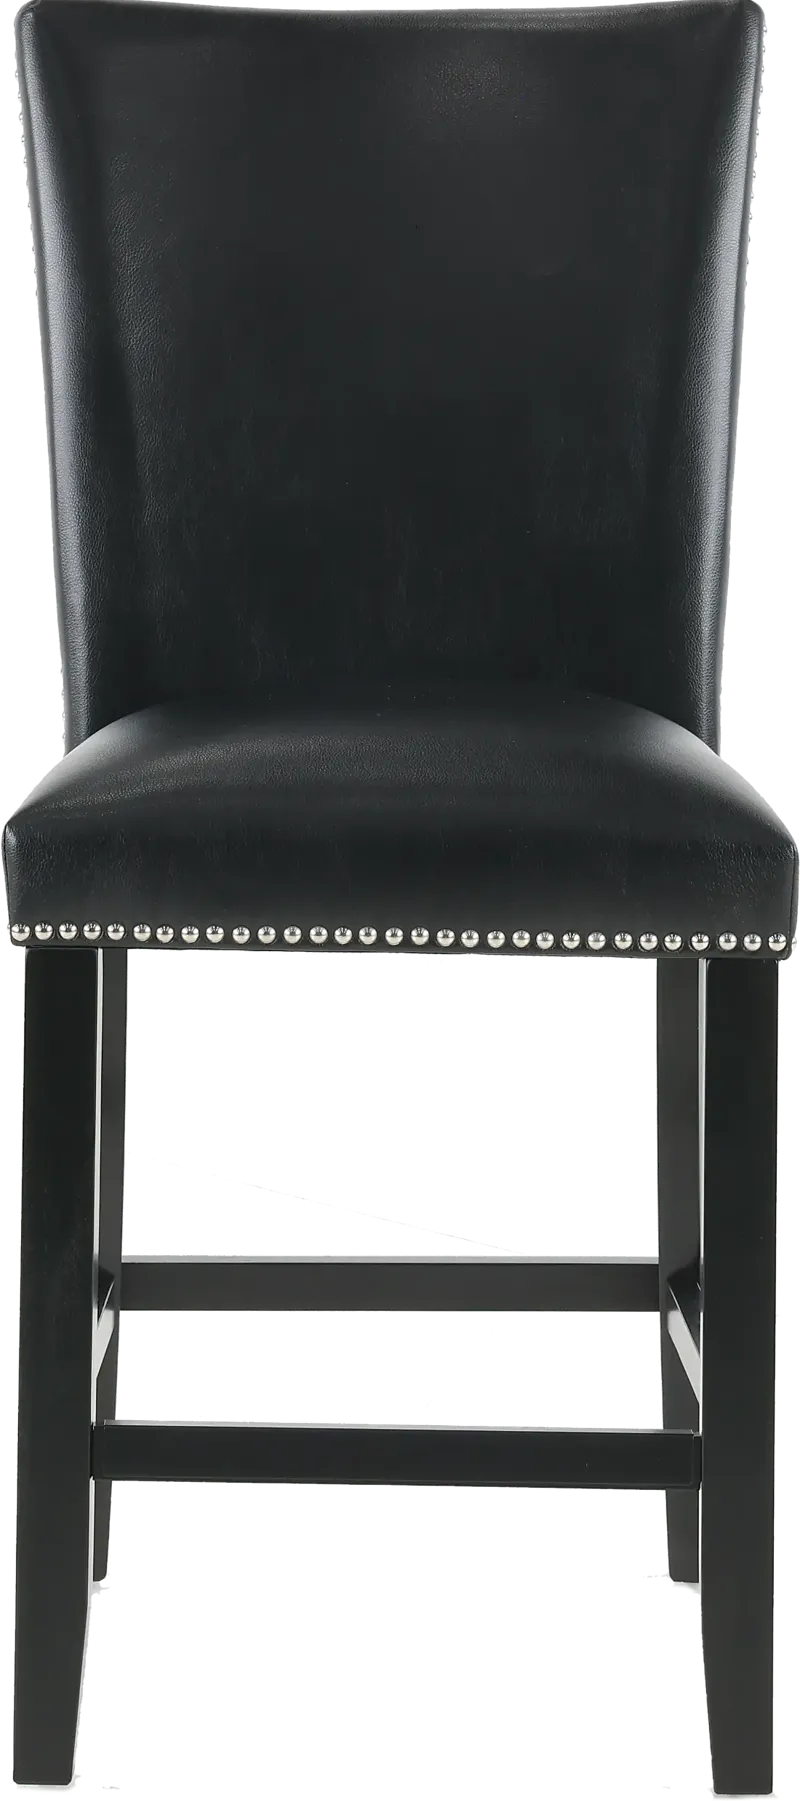 Camila Black Upholstered Counter Height Stool